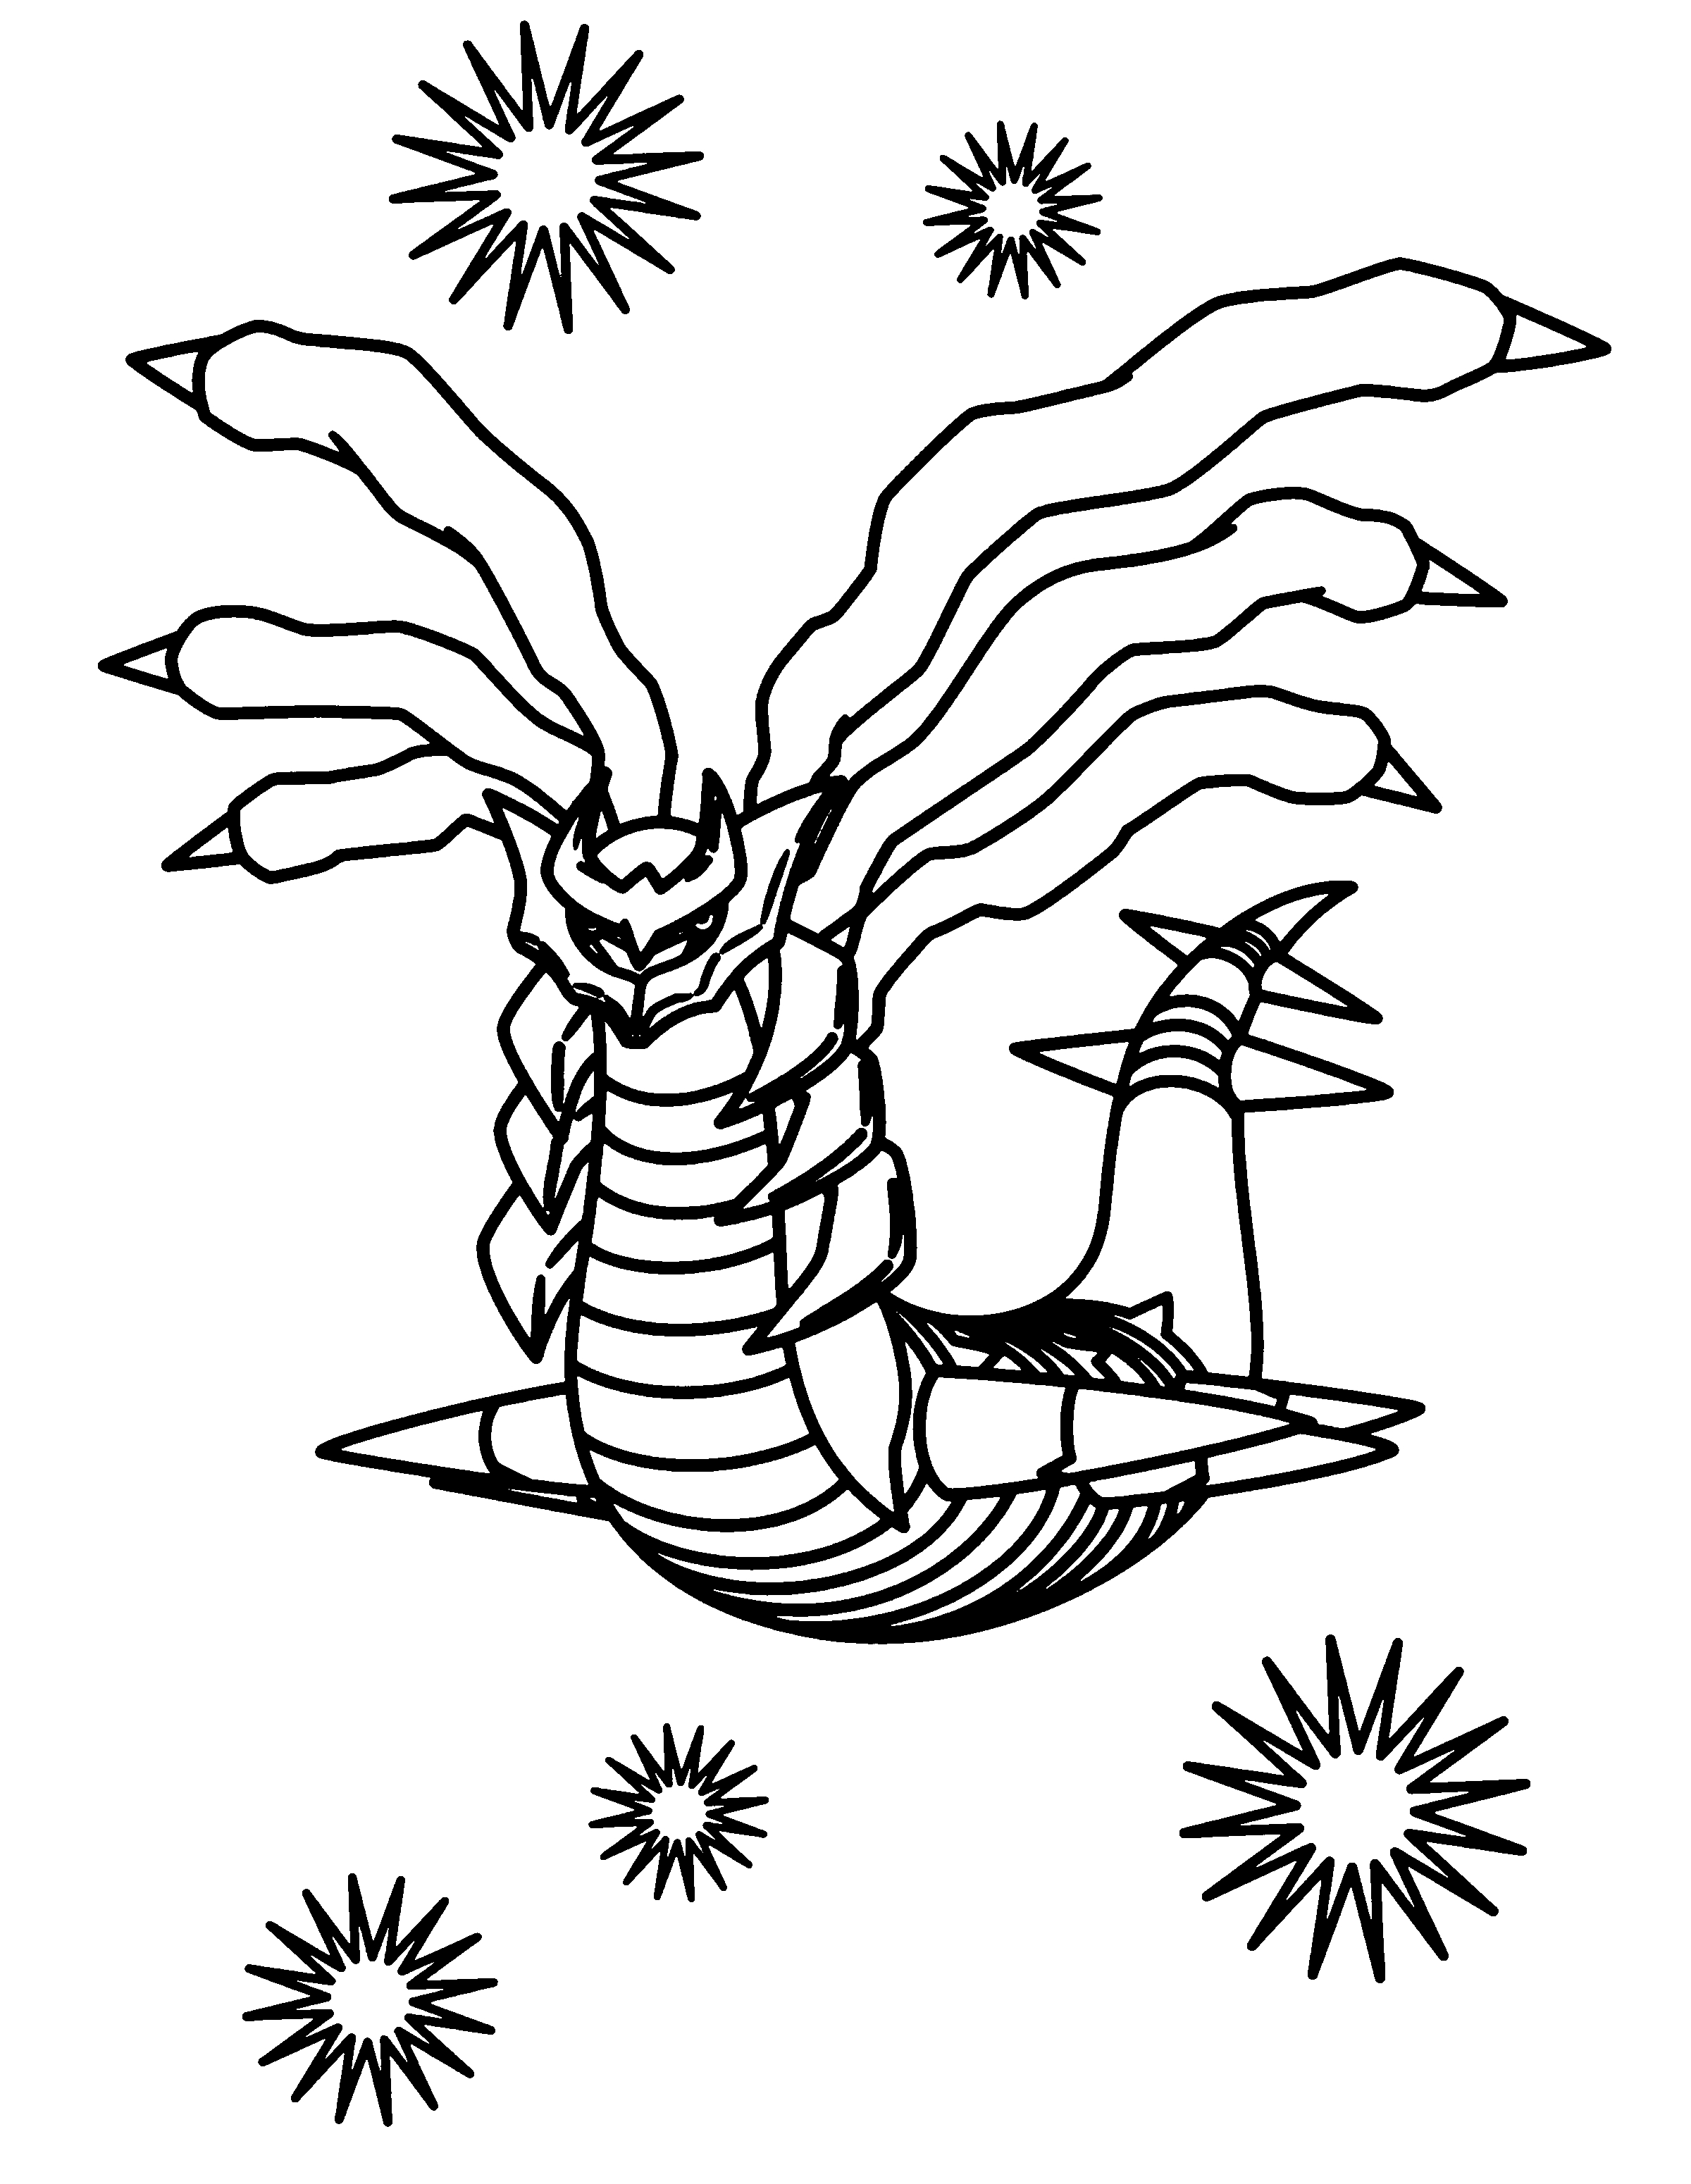 Giratina Coloring Pages Coloring Page Coloring Home